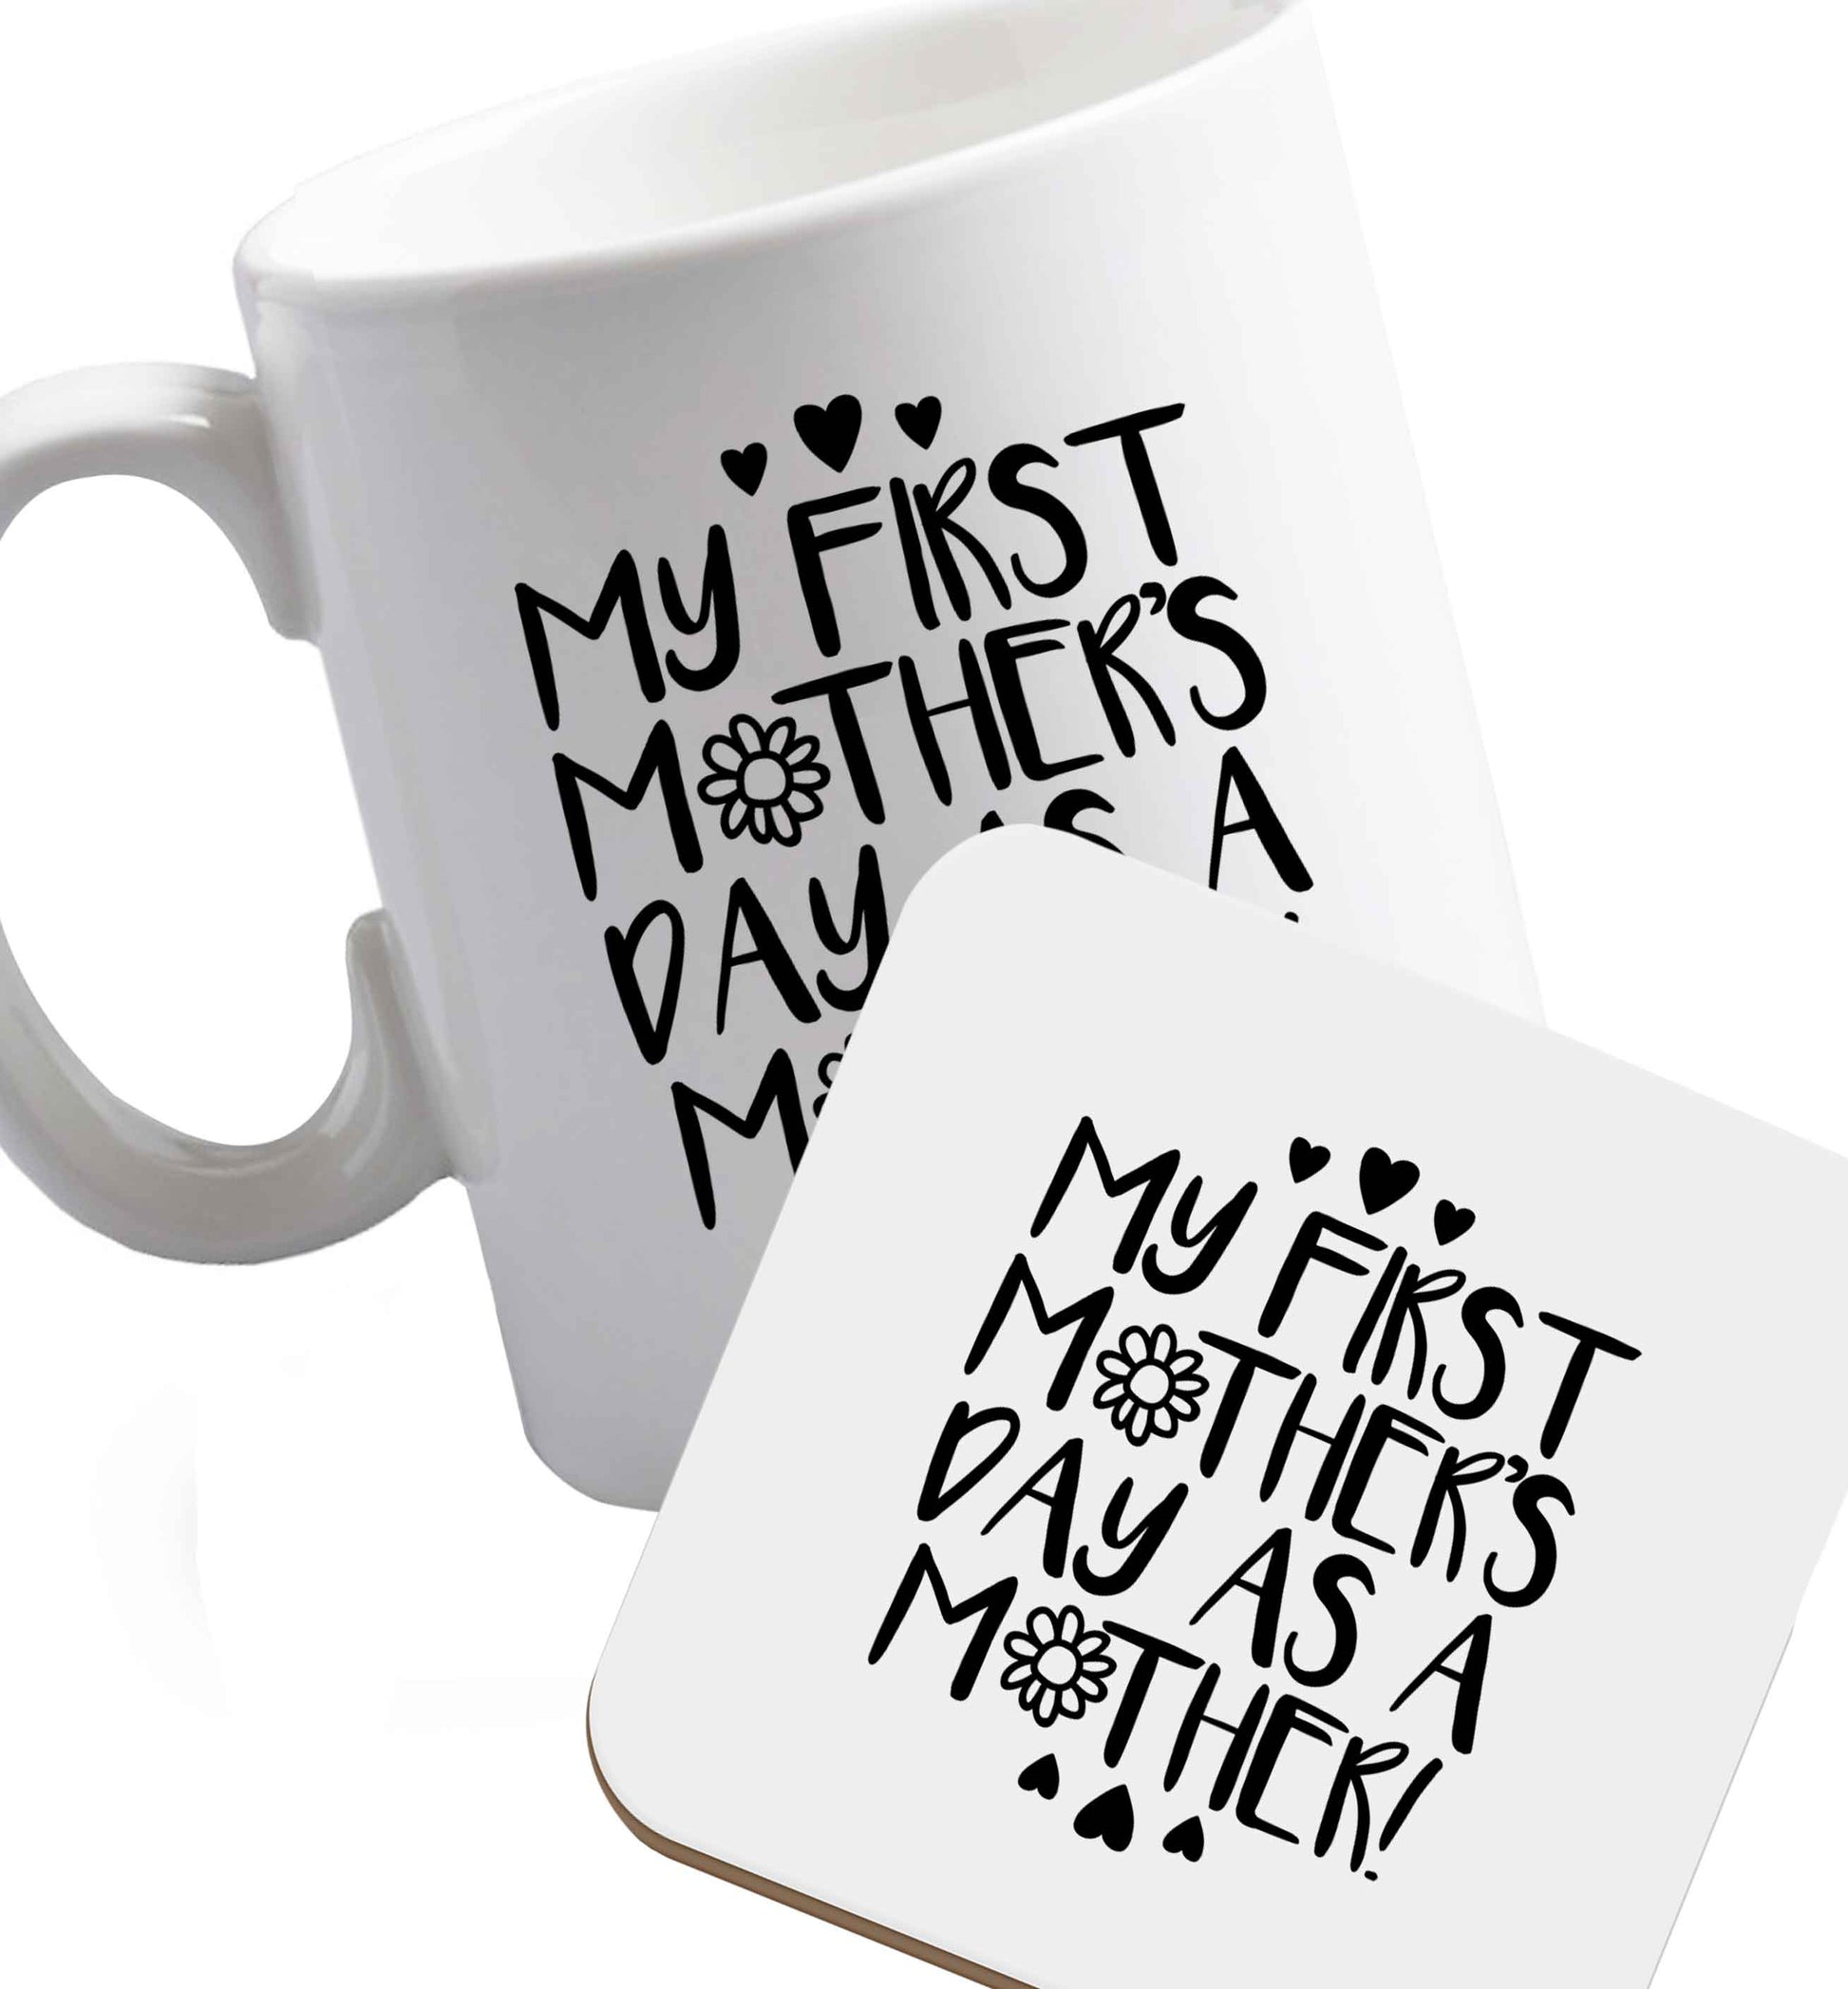 10 oz It's my first mother's day as a mother ceramic mug and coaster set right handed